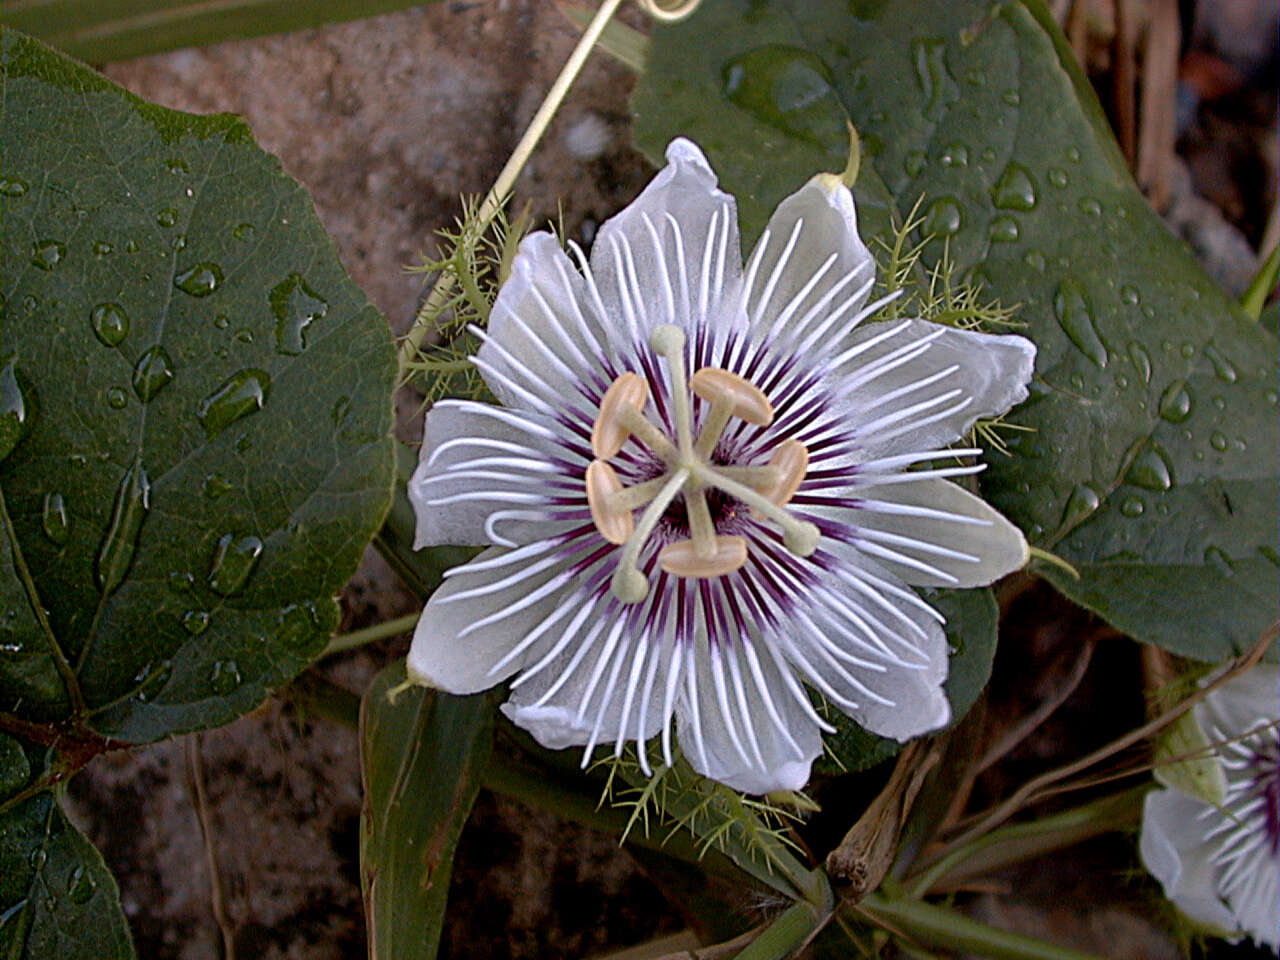 Image of fetid passionflower